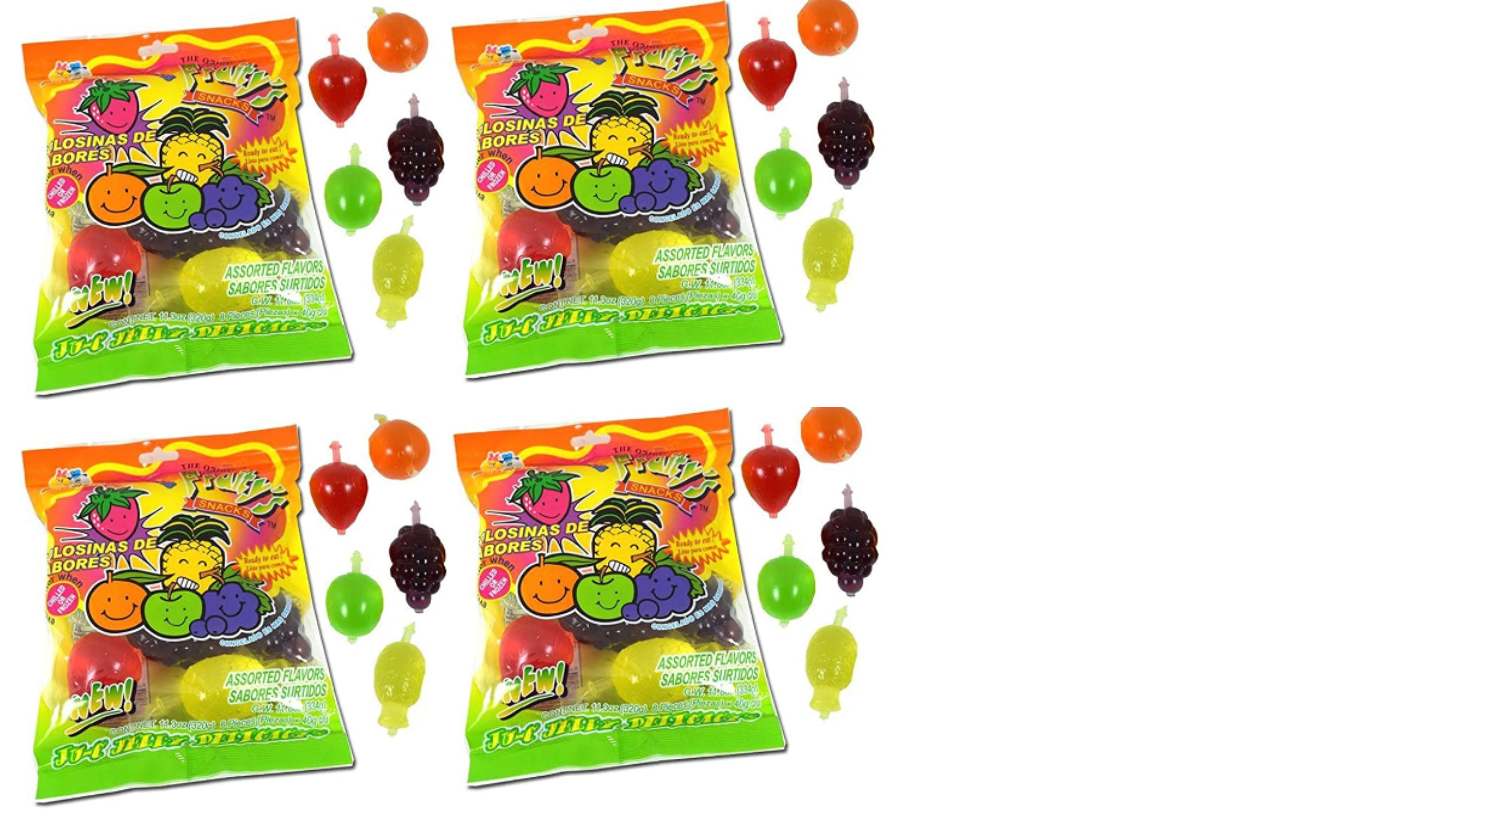 Jelly c. Джелли фрукты. Jelly Fruit Candy. Candied Fruit Jelly. Jelly delicacy’s.